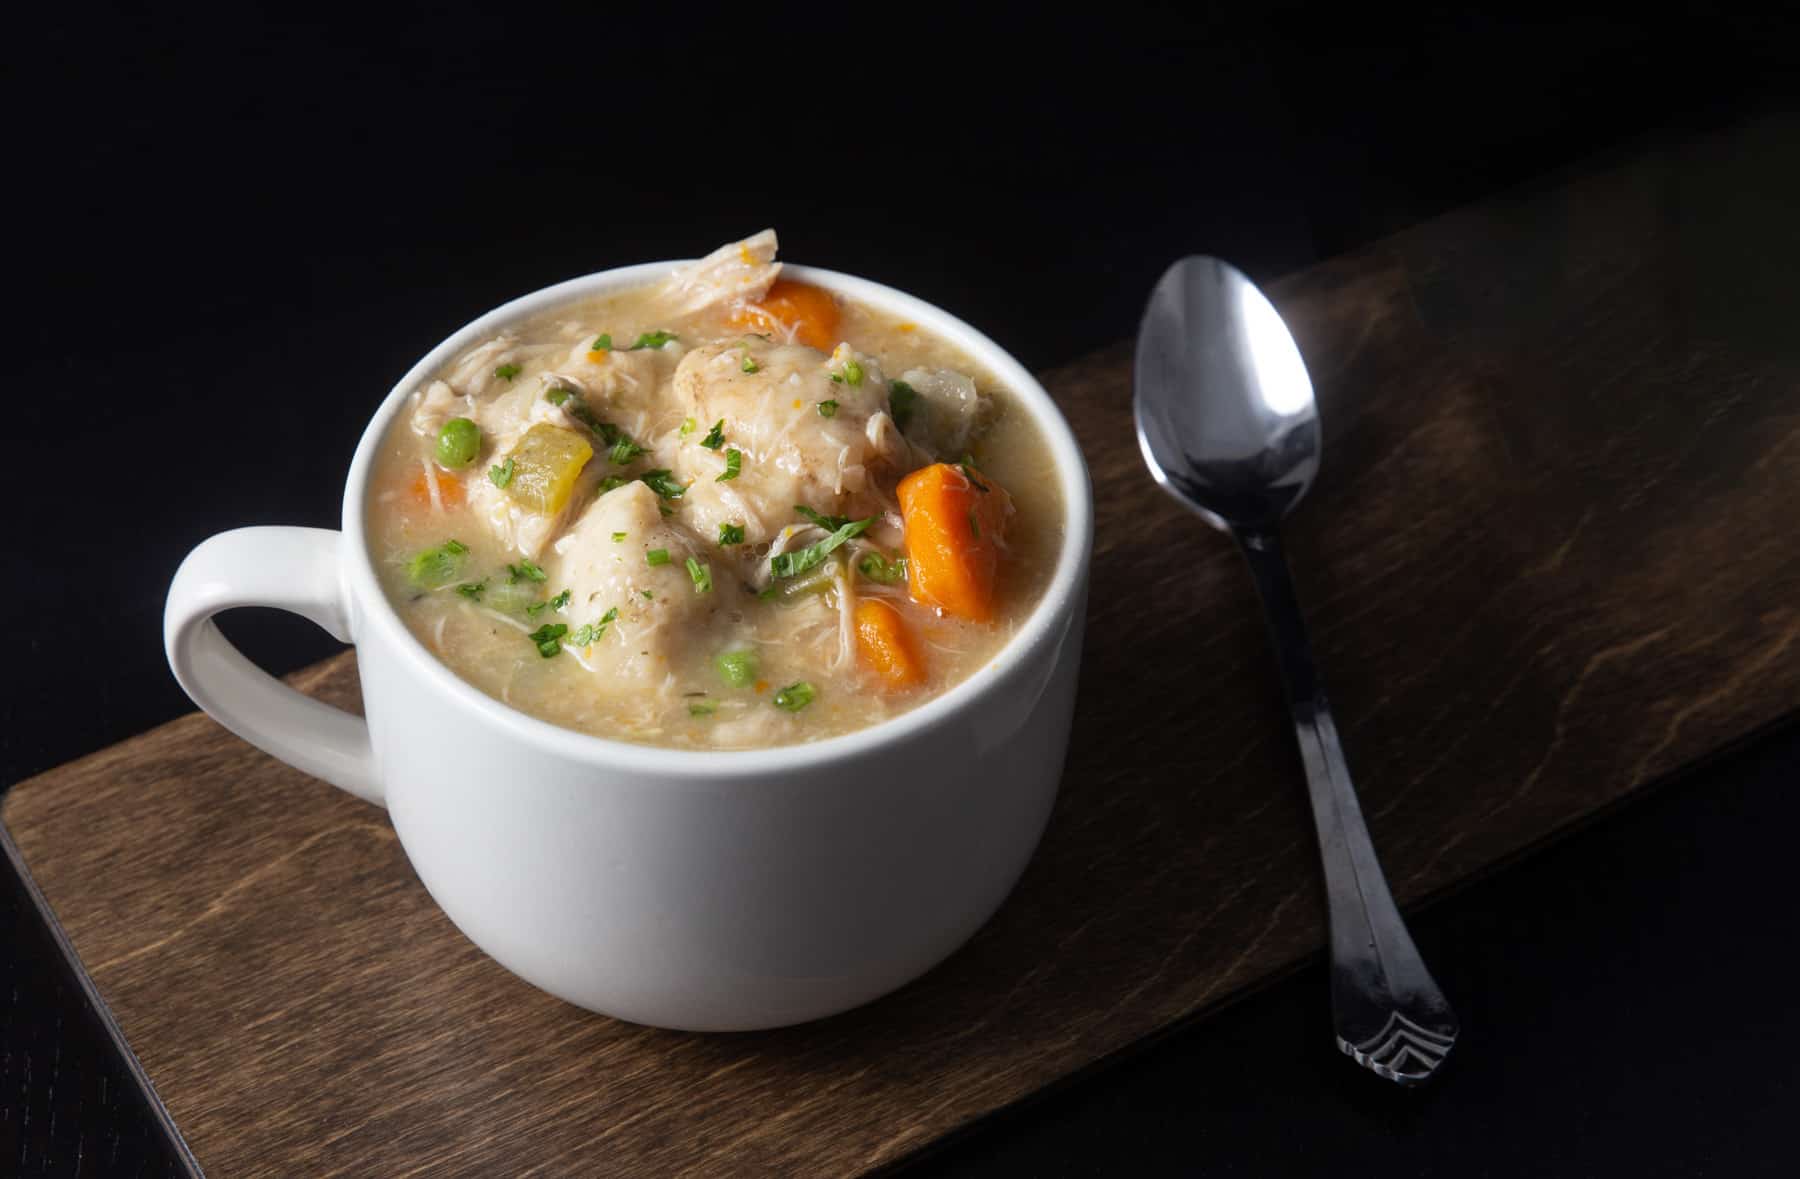 Instant Pot Chicken and Dumplings Recipe (Pressure Cooker Chicken and Dumplings): how to make satisfying Chicken and Dumplings - classic comfort food with tender chicken and fluffy homemade dumplings in aromatic chicken broth. An all-time family favorite! #instantpot #instantpotrecipes #instapot #pressurecooker #chickenrecipes #recipes